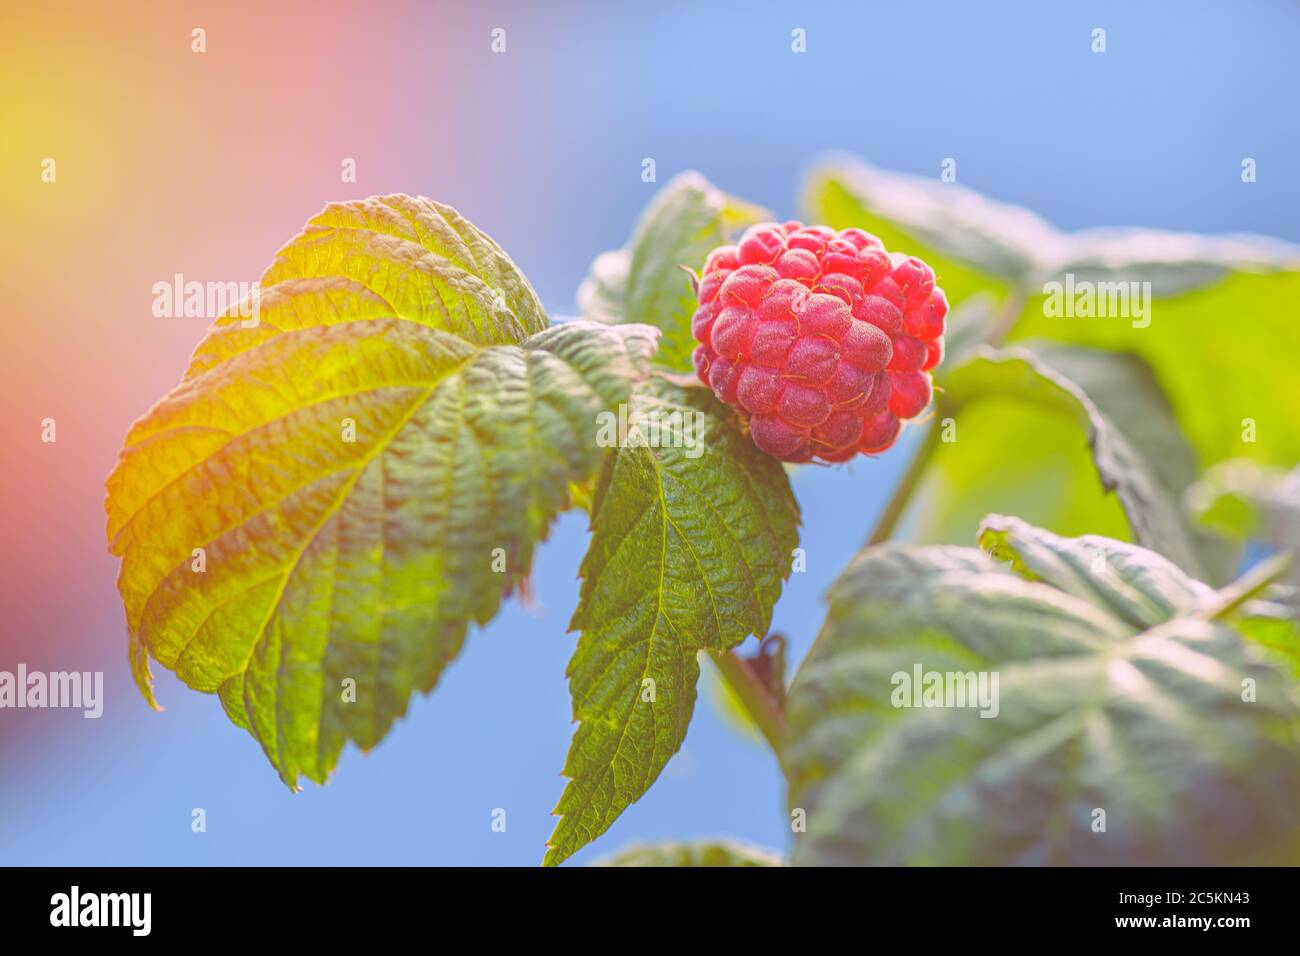 Raspberries in the sun. Photo of ripe raspberries on a branch. Raspberries on a branch in the garden. Red berry with green leaves in the sun. Stock Photo